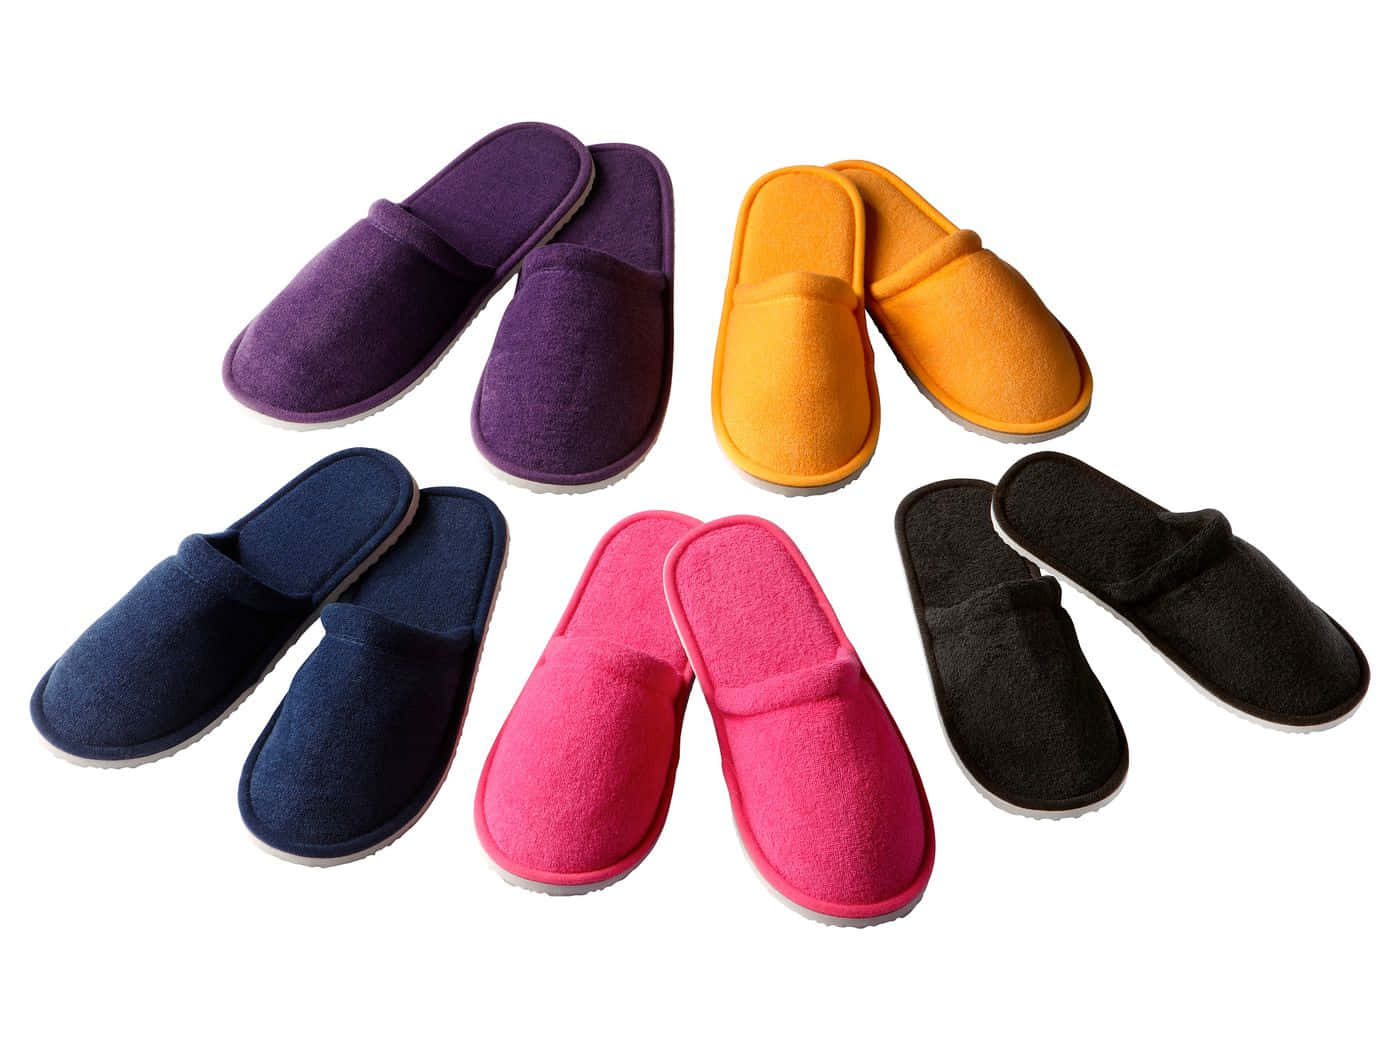 Colorful Collectionof Comfortable Slippers Wallpaper